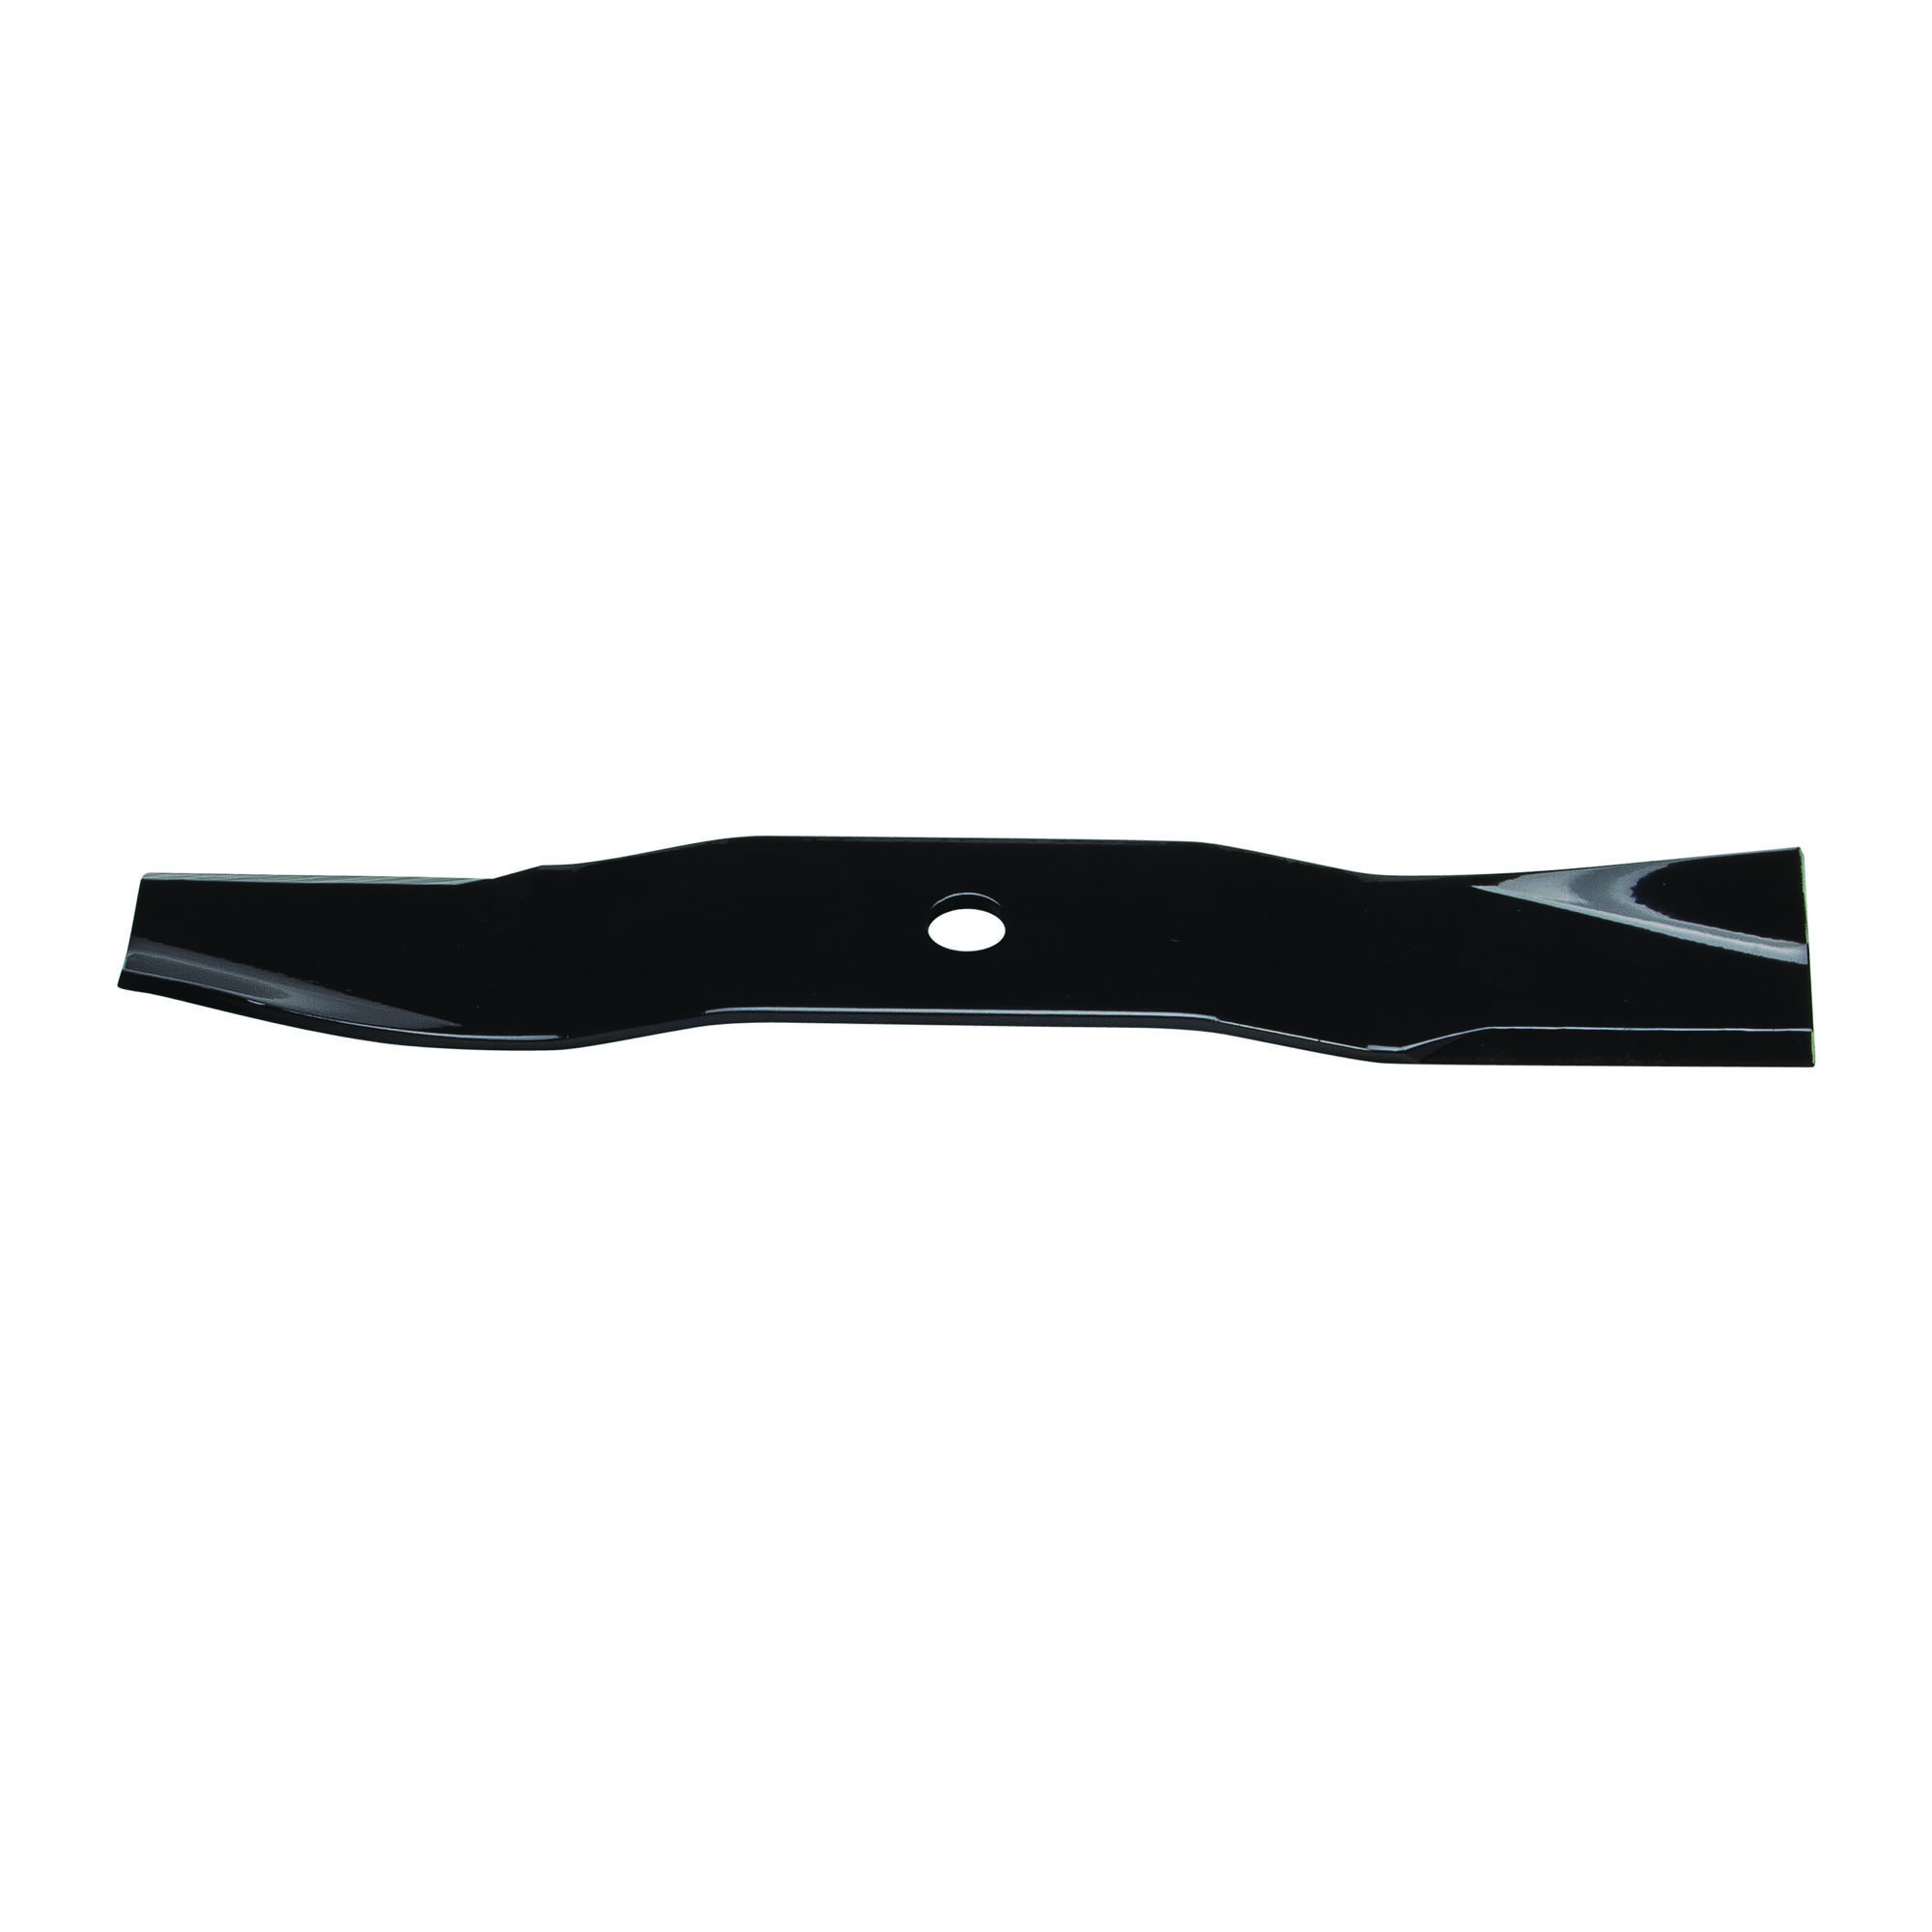 Oregon, Replacement Lawn Mower Blade, Length 16.563 in, Model 91-003